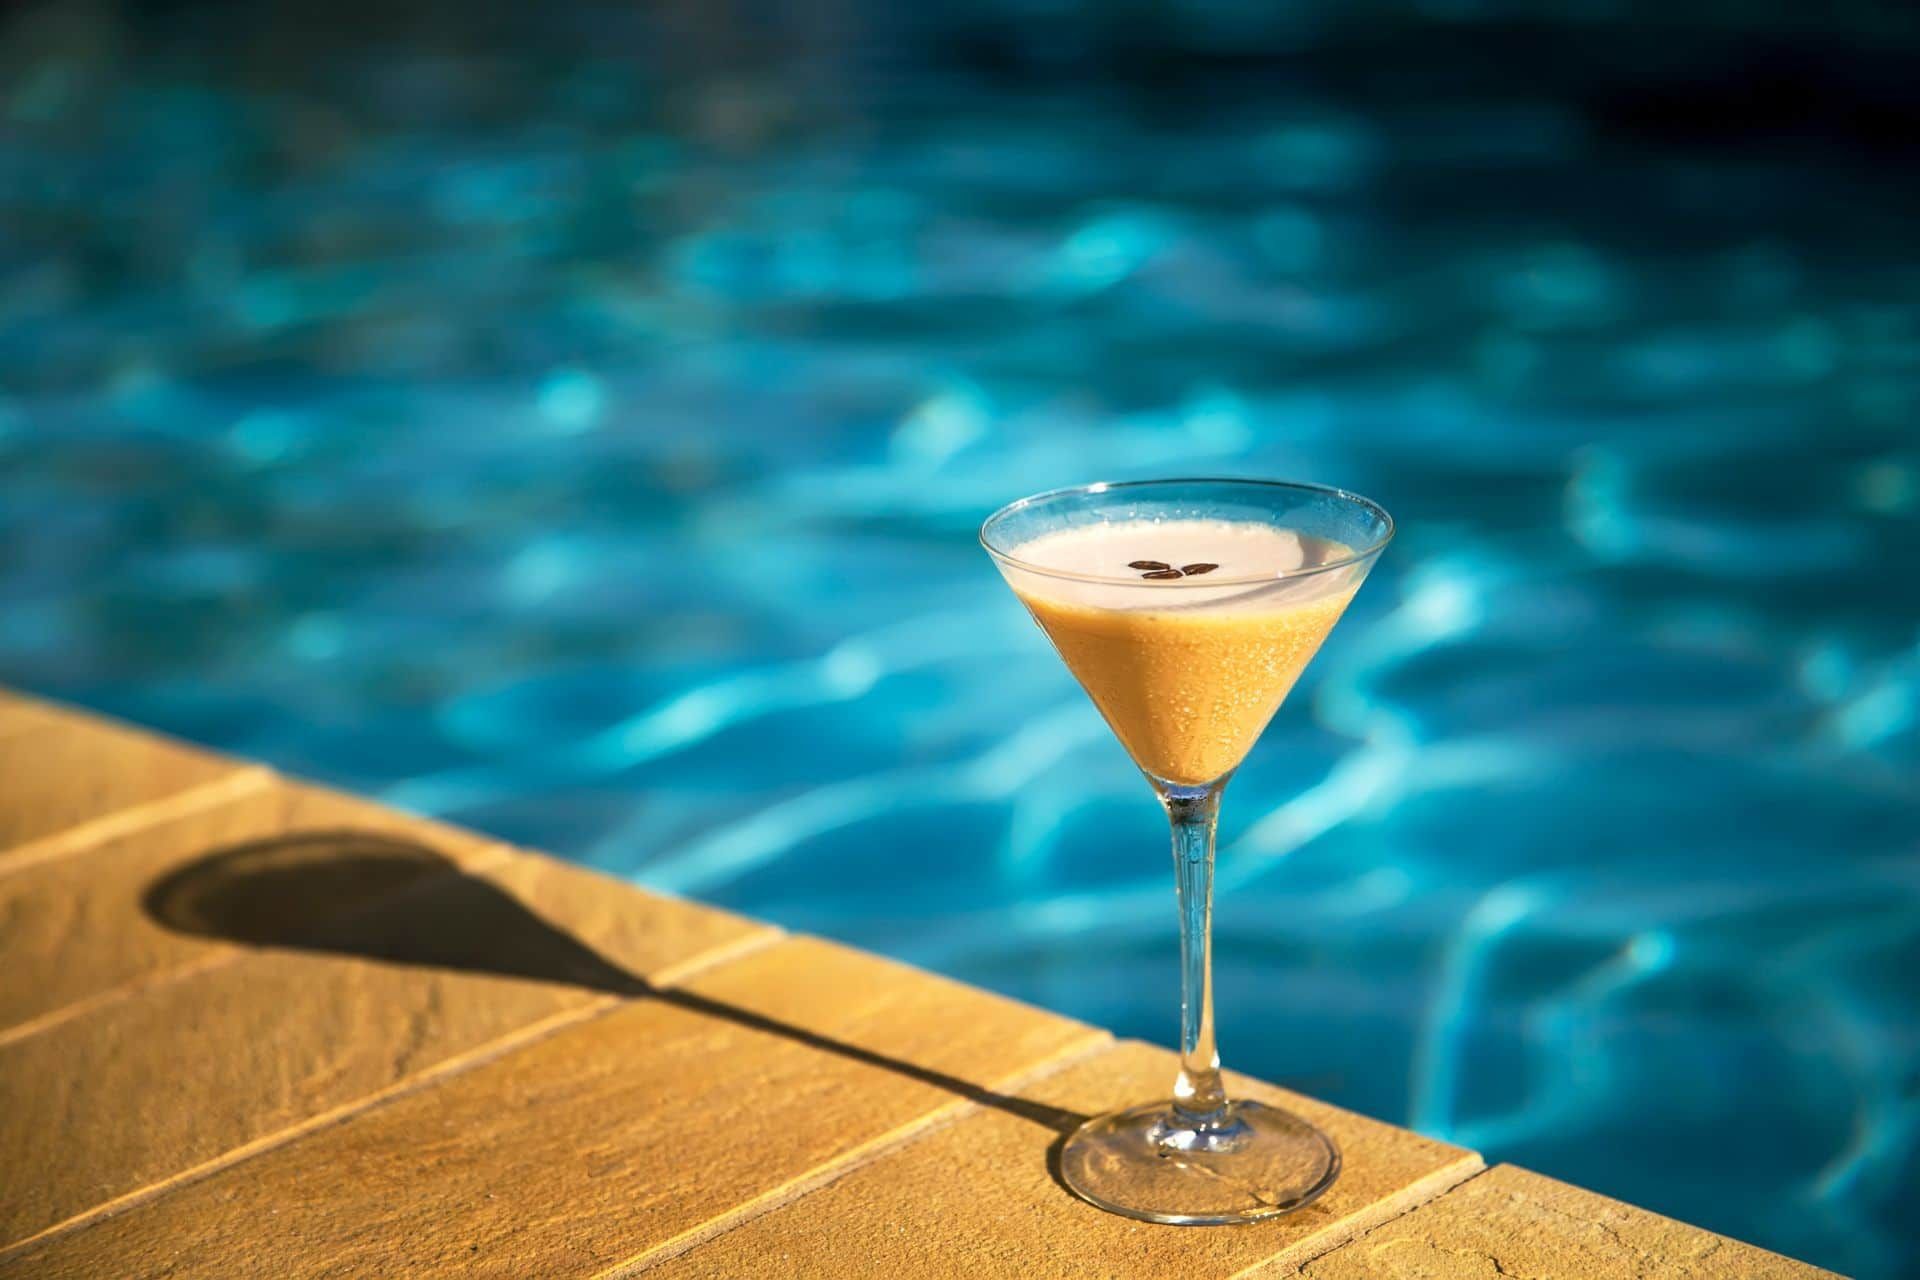 A cocktail by a pool in the sunshine at the Volivoli Beach Resort Fiji where you can find Fiji's best coral reefs